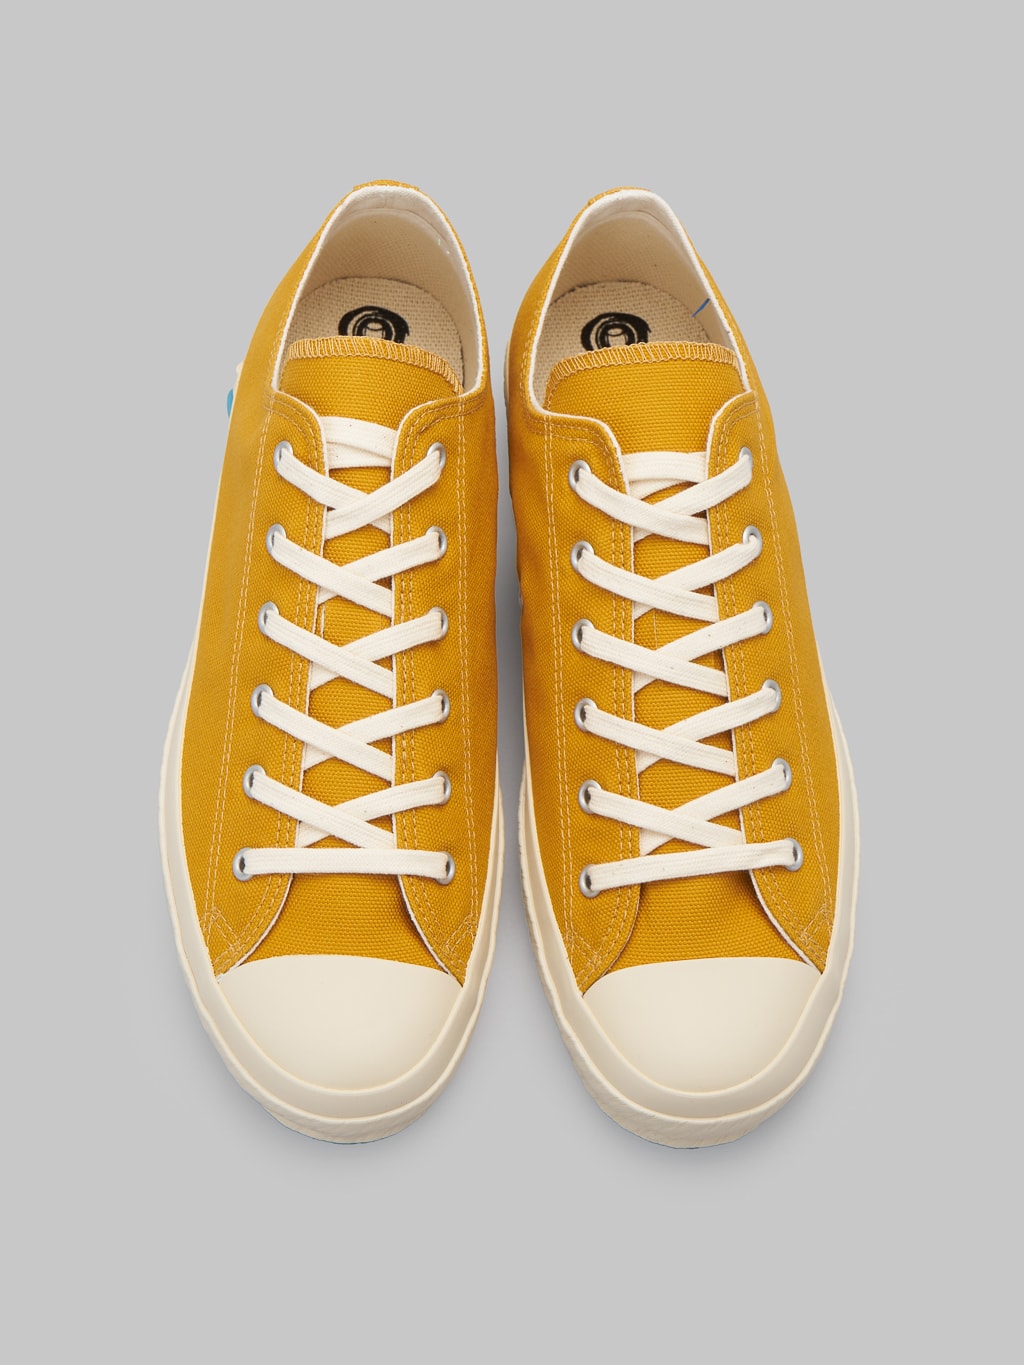 Shoes like pottery low mustard sneakers up view